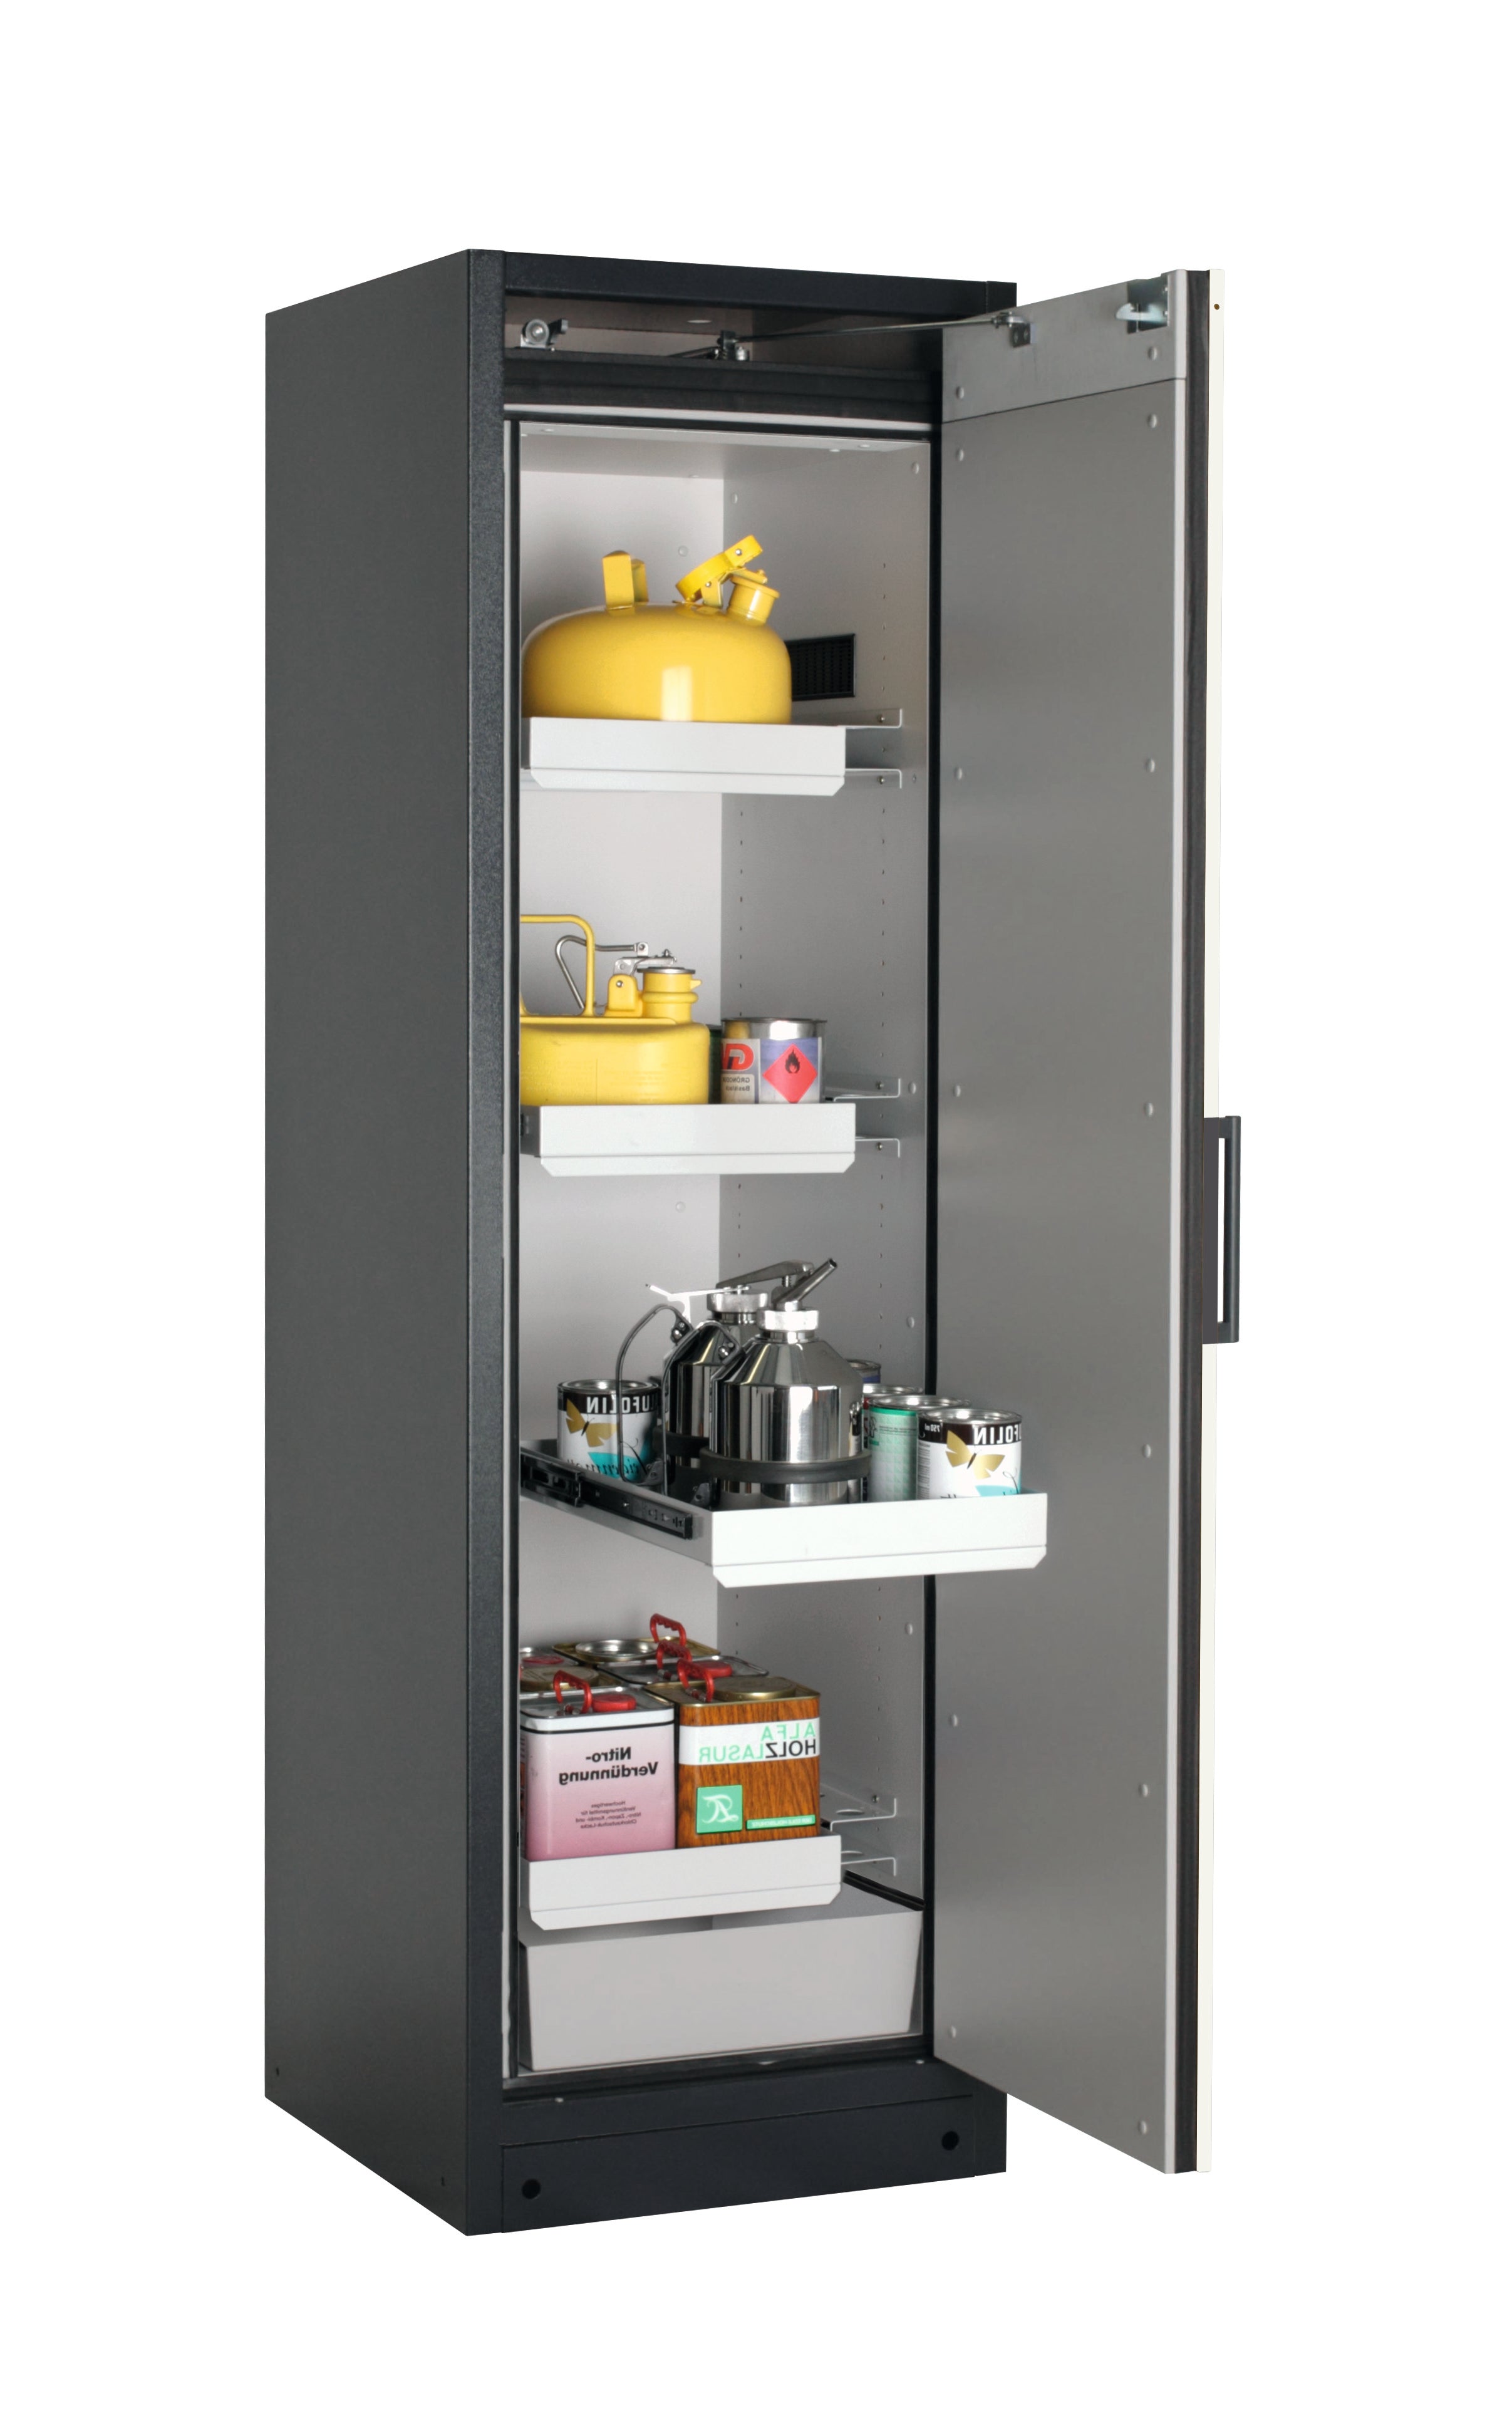 Type 90 safety storage cabinet Q-CLASSIC-90 model Q90.195.060.R in asecos silver with 3x drawer (standard) (sheet steel),